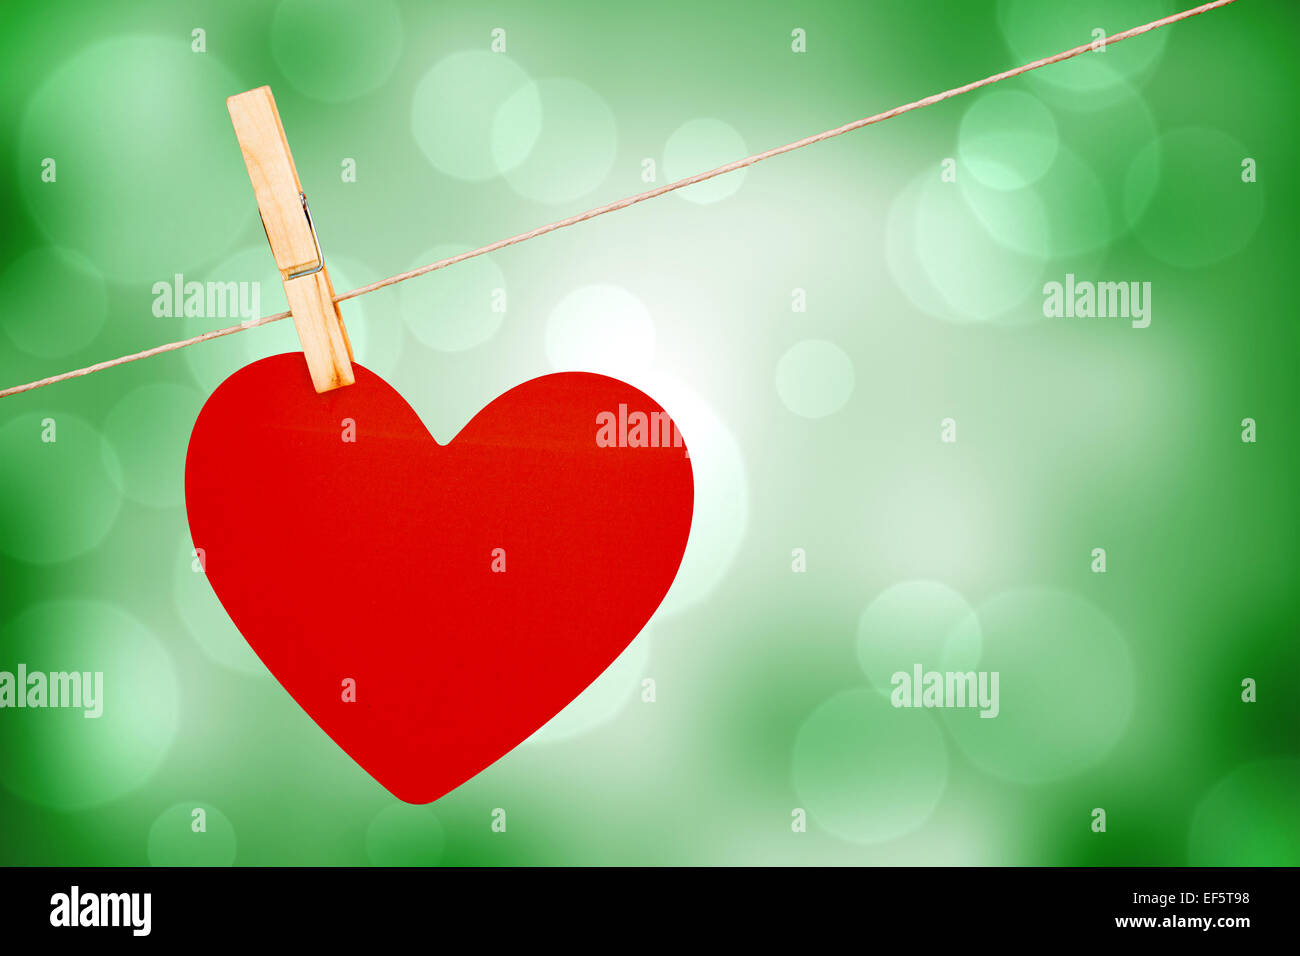 Composite image of heart hanging on line Stock Photo